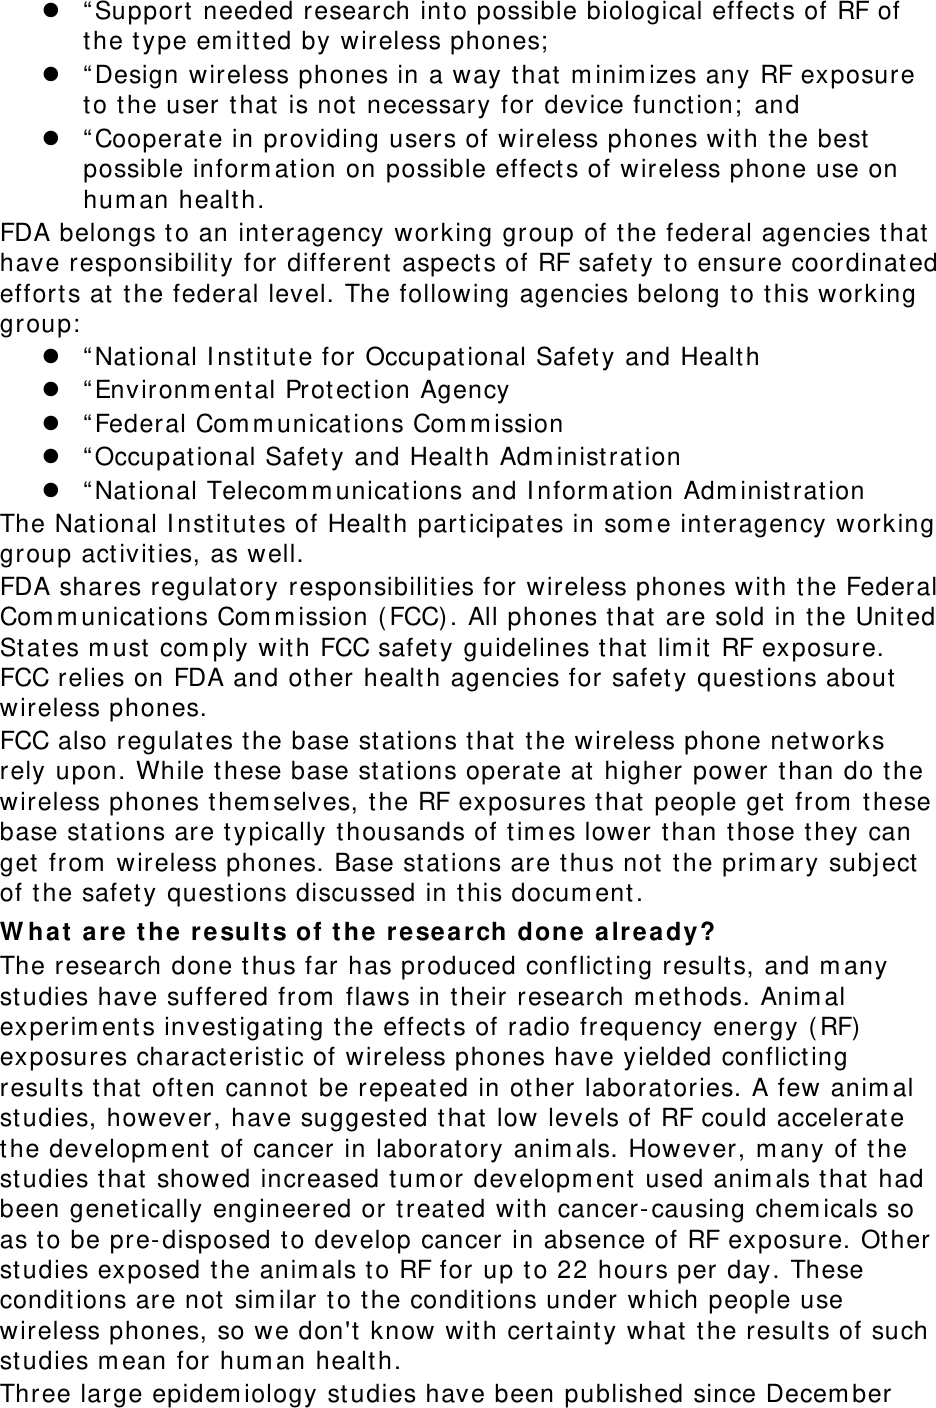  “ Support  needed research int o possible biological effects of RF of the t ype em it t ed by wireless phones;   “ Design wireless phones in a way t hat  m inim izes any RF exposure to t he user t hat  is not  necessary for device funct ion;  and  “ Cooperat e in providing users of wireless phones wit h t he best possible inform at ion on possible effect s of wireless phone use on hum an health. FDA belongs to an int eragency working group of t he federal agencies t hat  have responsibility for different  aspect s of RF safety to ensure coordinat ed efforts at  the federal level. The following agencies belong t o t his working group:   “ Nat ional I nst itut e for Occupat ional Safety and Healt h  “ Environm ent al Protection Agency  “ Federal Com m unications Com m ission  “ Occupat ional Safet y and Healt h Adm inist ration  “ Nat ional Telecom m unications and I nform at ion Adm inist ration The Nat ional I nst itut es of Healt h part icipat es in som e int eragency working group act ivit ies, as well. FDA shares regulat ory responsibilit ies for wireless phones wit h t he Federal Com m unications Com m ission ( FCC). All phones t hat are sold in t he Unit ed St at es m ust  com ply with FCC safet y guidelines t hat  lim it RF exposure. FCC relies on FDA and ot her healt h agencies for safety quest ions about wireless phones. FCC also regulat es the base stat ions that  t he wireless phone net works rely upon. While t hese base st ations operat e at  higher power t han do t he wireless phones t hem selves, t he RF exposures t hat people get  from  t hese base stat ions are t ypically t housands of t im es lower t han t hose t hey can get  from  wireless phones. Base st at ions are t hus not  t he prim ary subj ect  of t he safet y quest ions discussed in t his docum ent. W hat  a r e  t he  result s of t he r e search  don e a lrea dy? The research done t hus far has produced conflict ing result s, and m any studies have suffered from  flaws in t heir research m ethods. Anim al experim ent s investigat ing t he effect s of radio frequency energy ( RF) exposures charact eristic of wireless phones have yielded conflict ing result s that oft en cannot  be repeat ed in other laborat ories. A few anim al studies, however, have suggest ed that  low levels of RF could accelerat e the developm ent  of cancer in laborat ory anim als. However, m any of t he studies that showed increased t um or developm ent used anim als t hat  had been genet ically engineered or t reat ed wit h cancer- causing chem icals so as t o be pre- disposed t o develop cancer in absence of RF exposure. Ot her studies exposed t he anim als to RF for up t o 22 hours per day. These conditions are not  sim ilar t o t he condit ions under which people use wireless phones, so we don&apos;t  know wit h cert aint y what  the result s of such studies m ean for hum an healt h. Three large epidem iology st udies have been published since Decem ber 